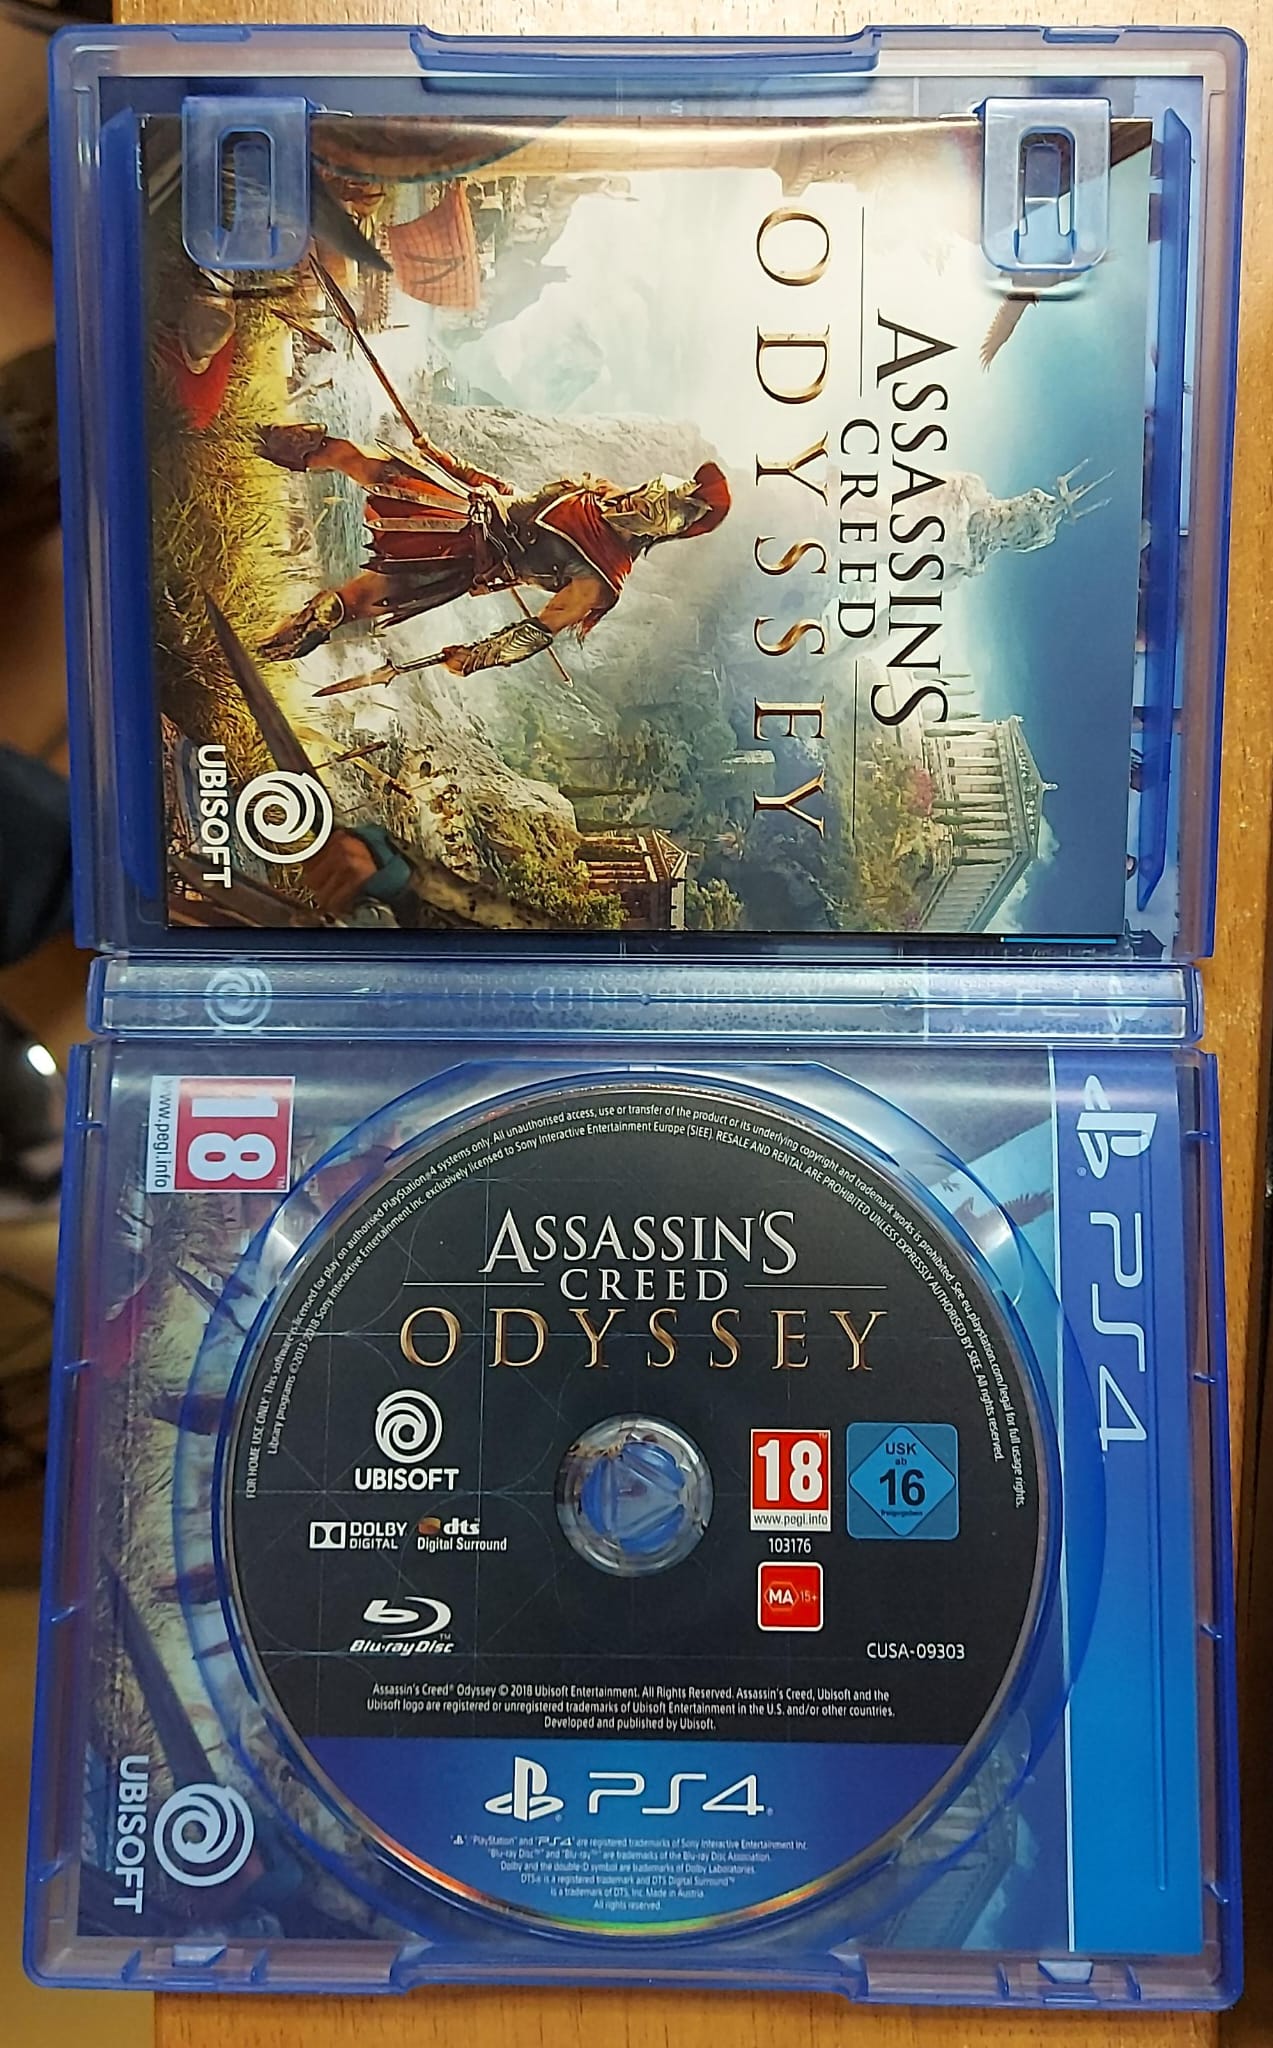 ASSASSIN'S CREED ODYSSEY OMEGA EDITION